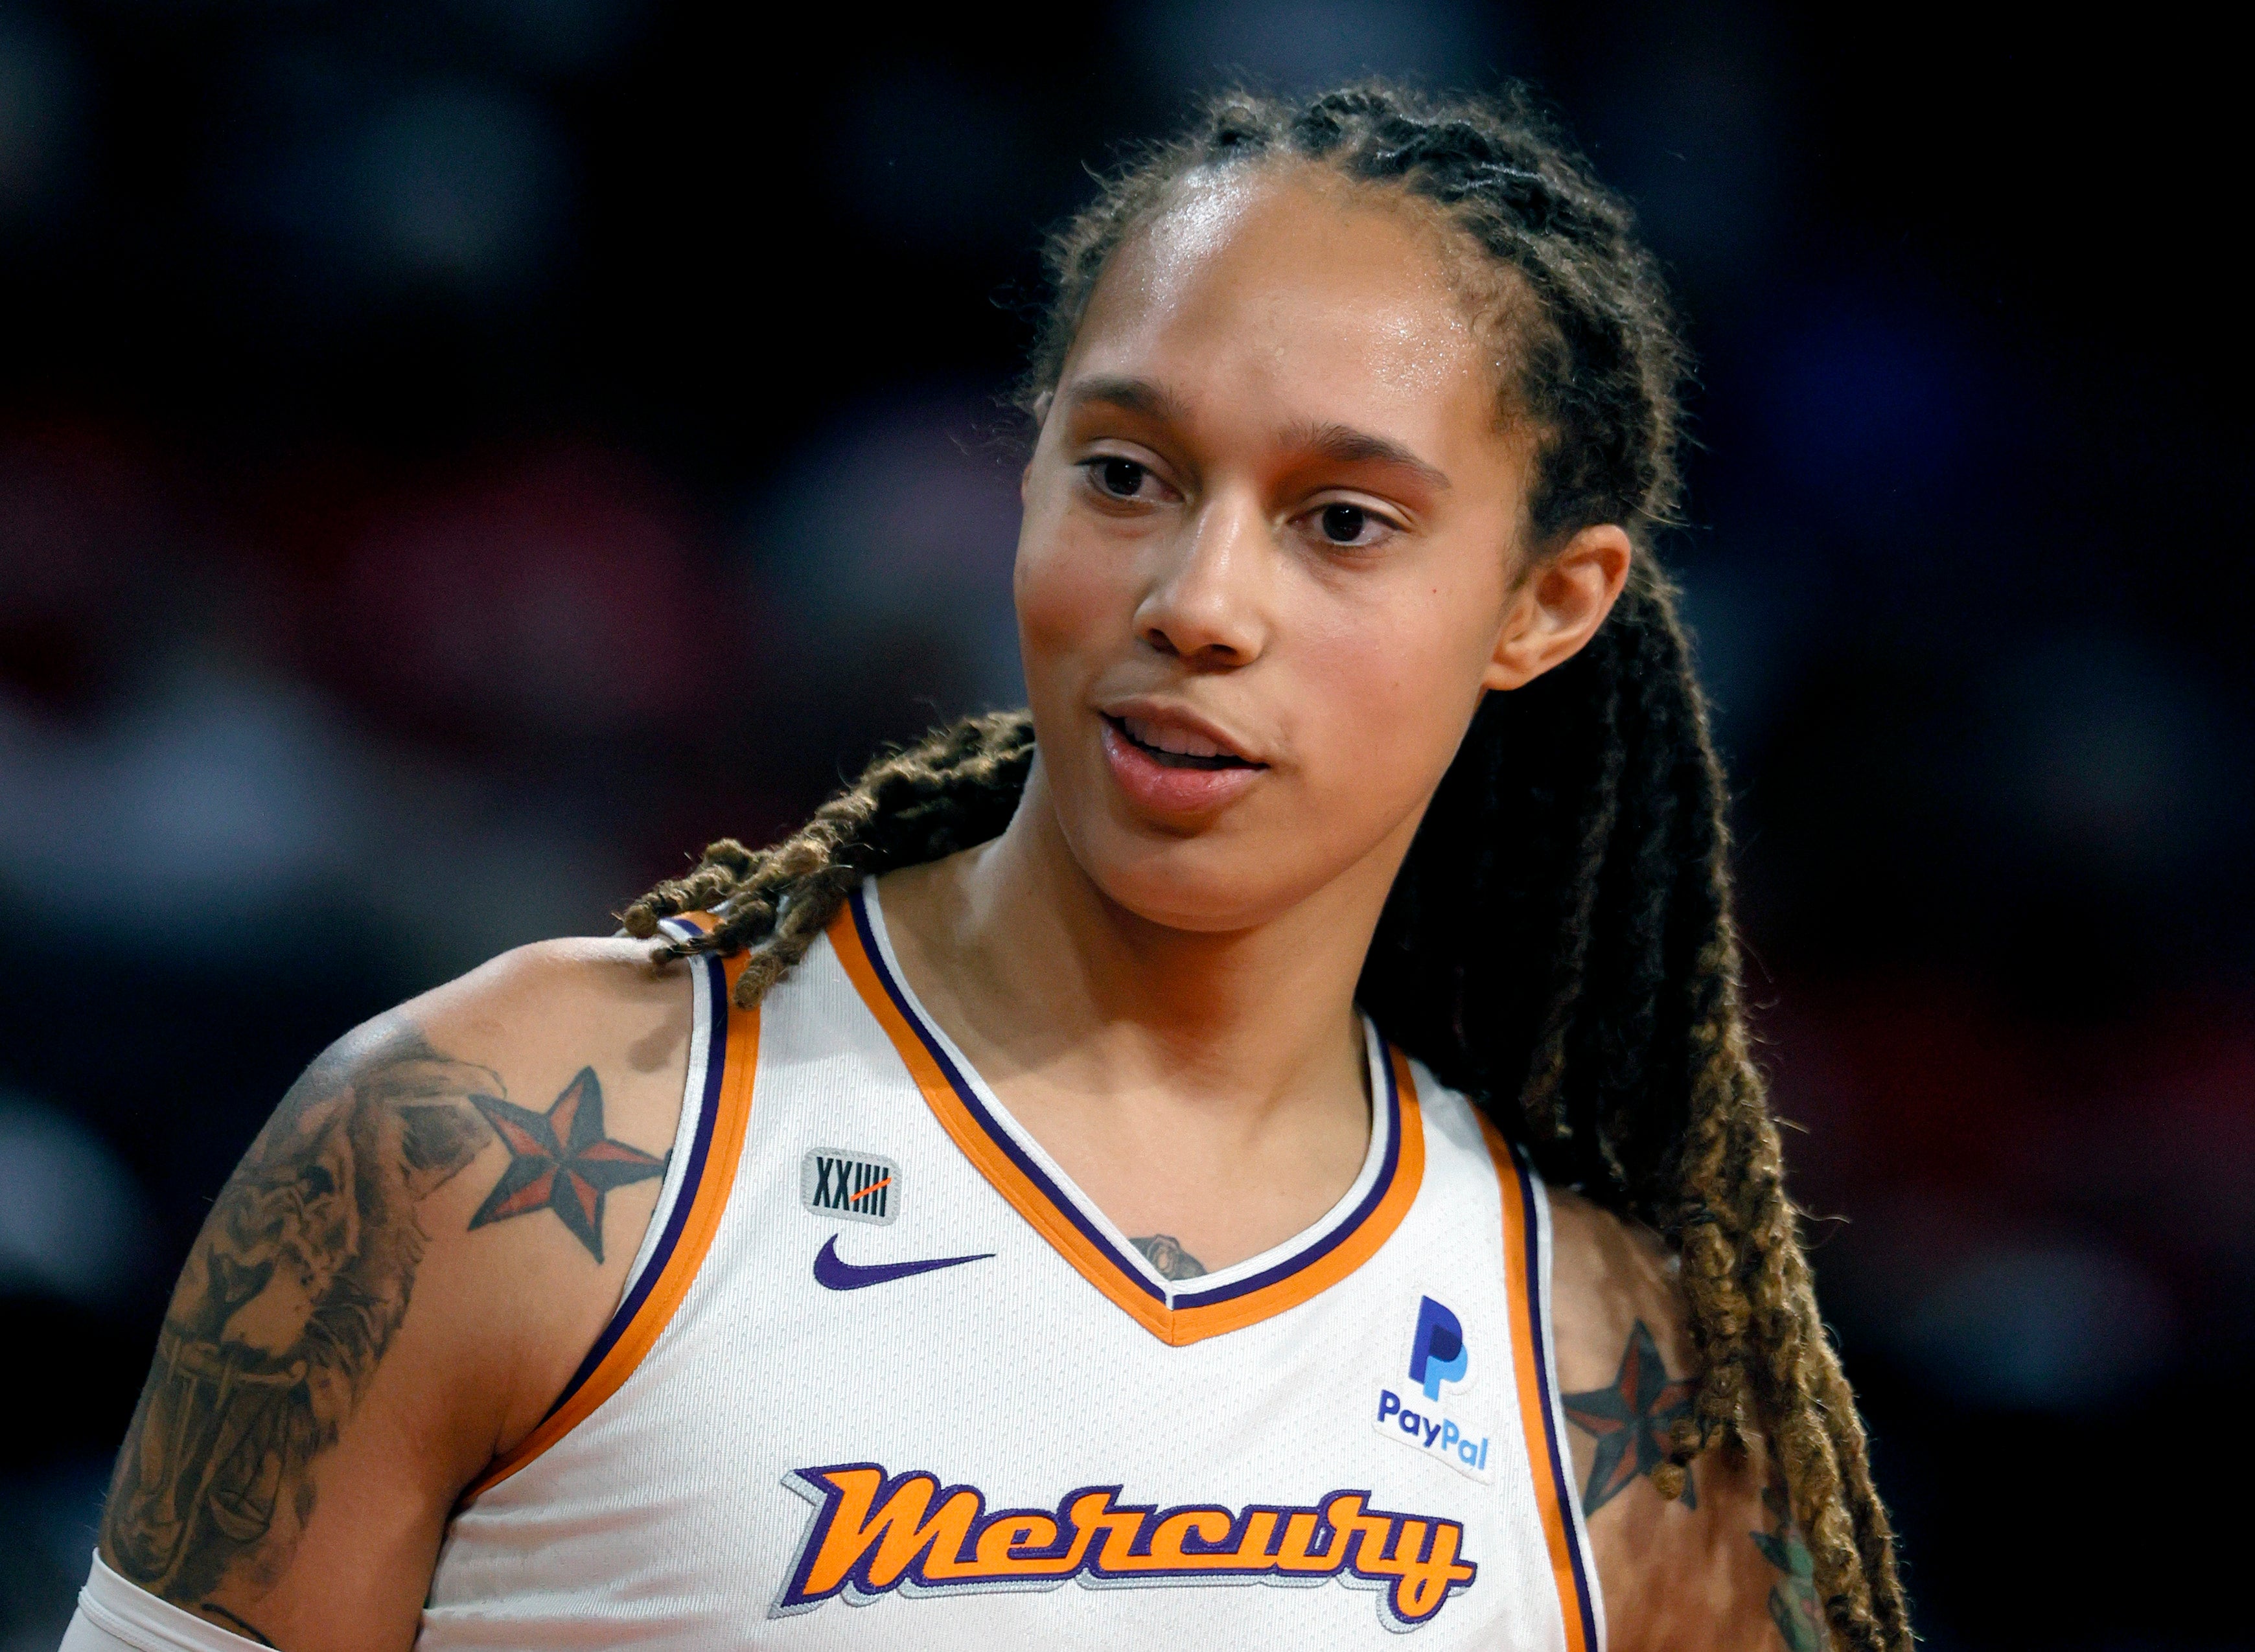 Brittney Griner has been playing at the highest level of basketball for more than a decade